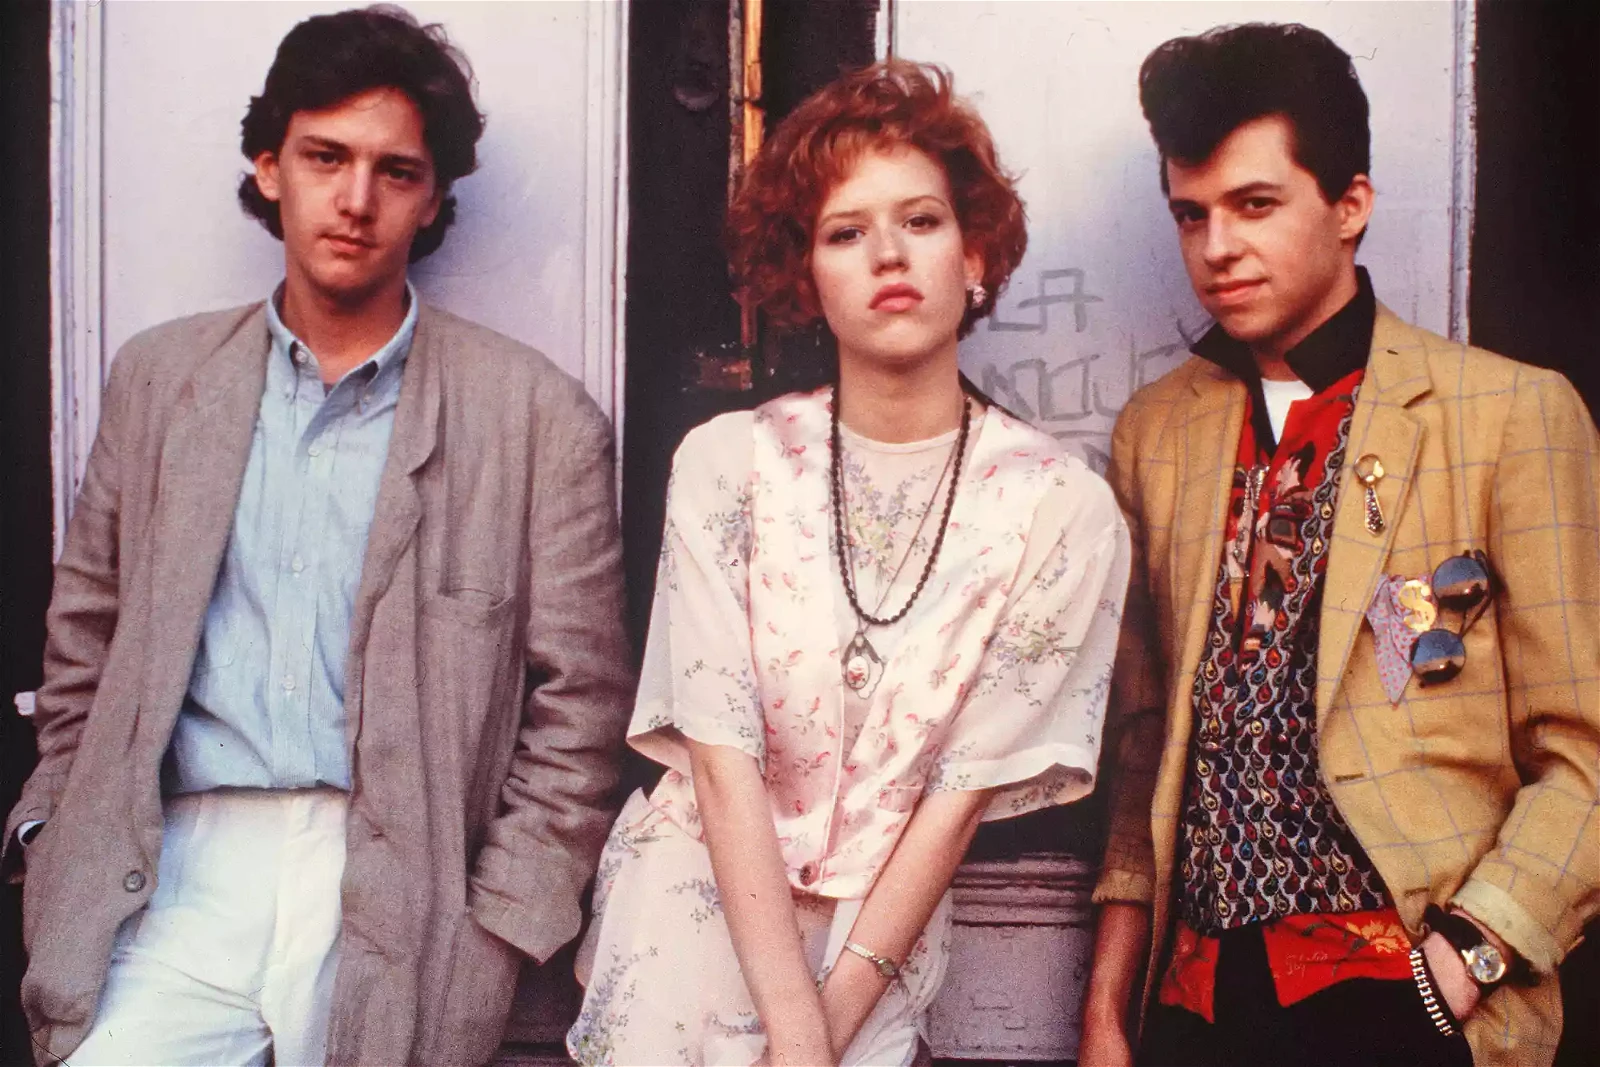 Andrew McCarthy, Molly Ringwald and Jon Cryer in Pretty in Pink